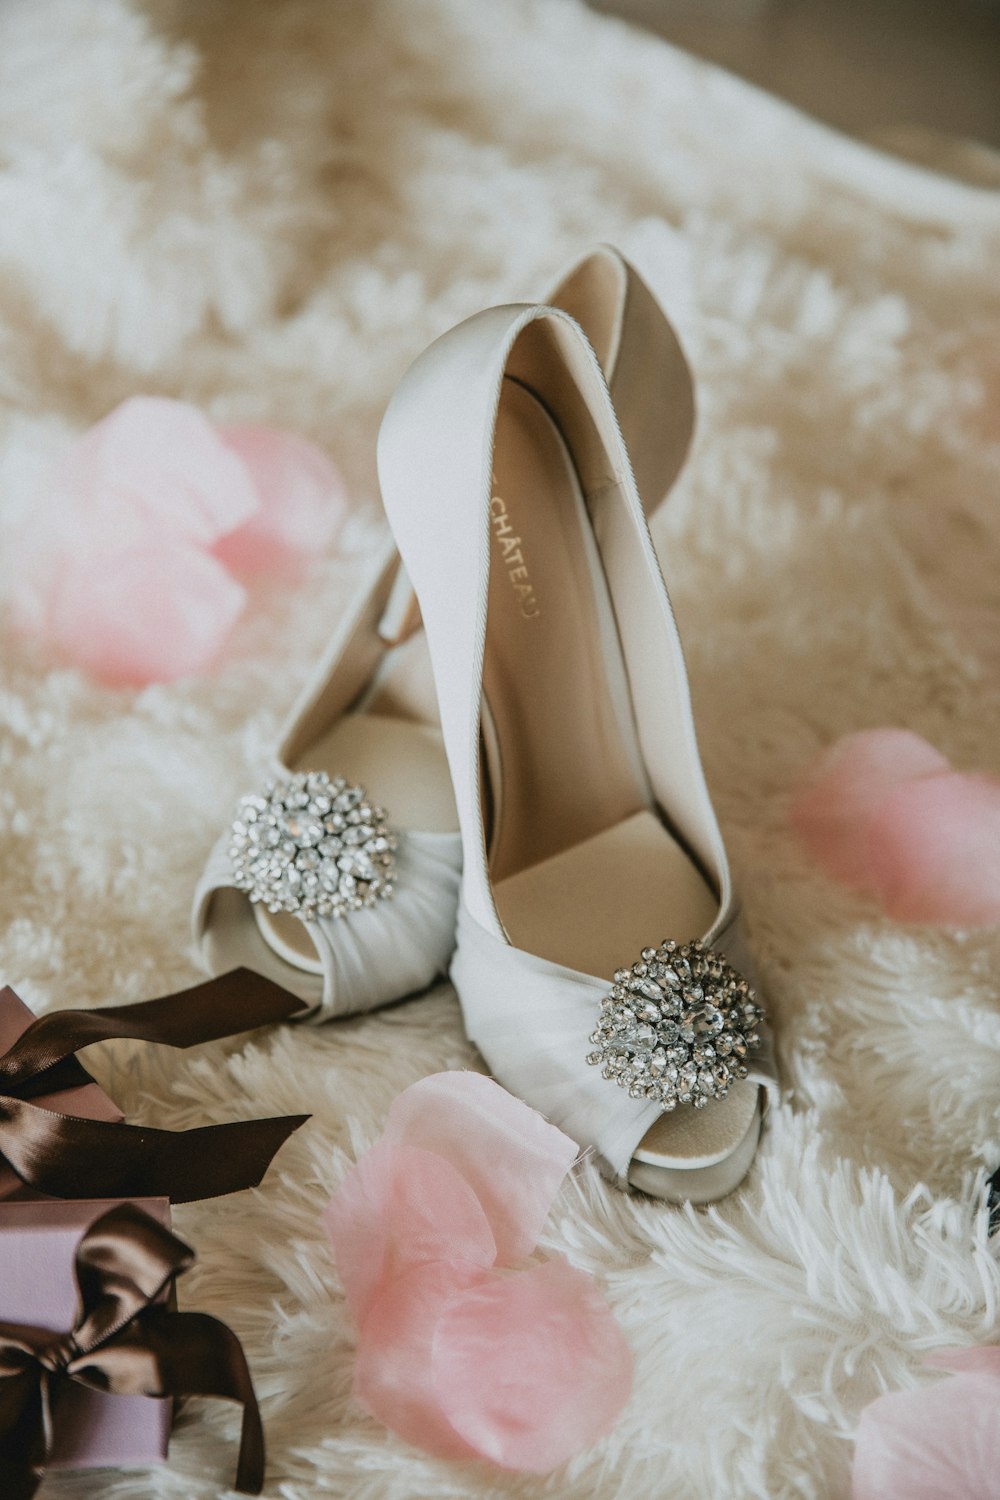 pair of white leather peep-toe heeled shoes with bow accent